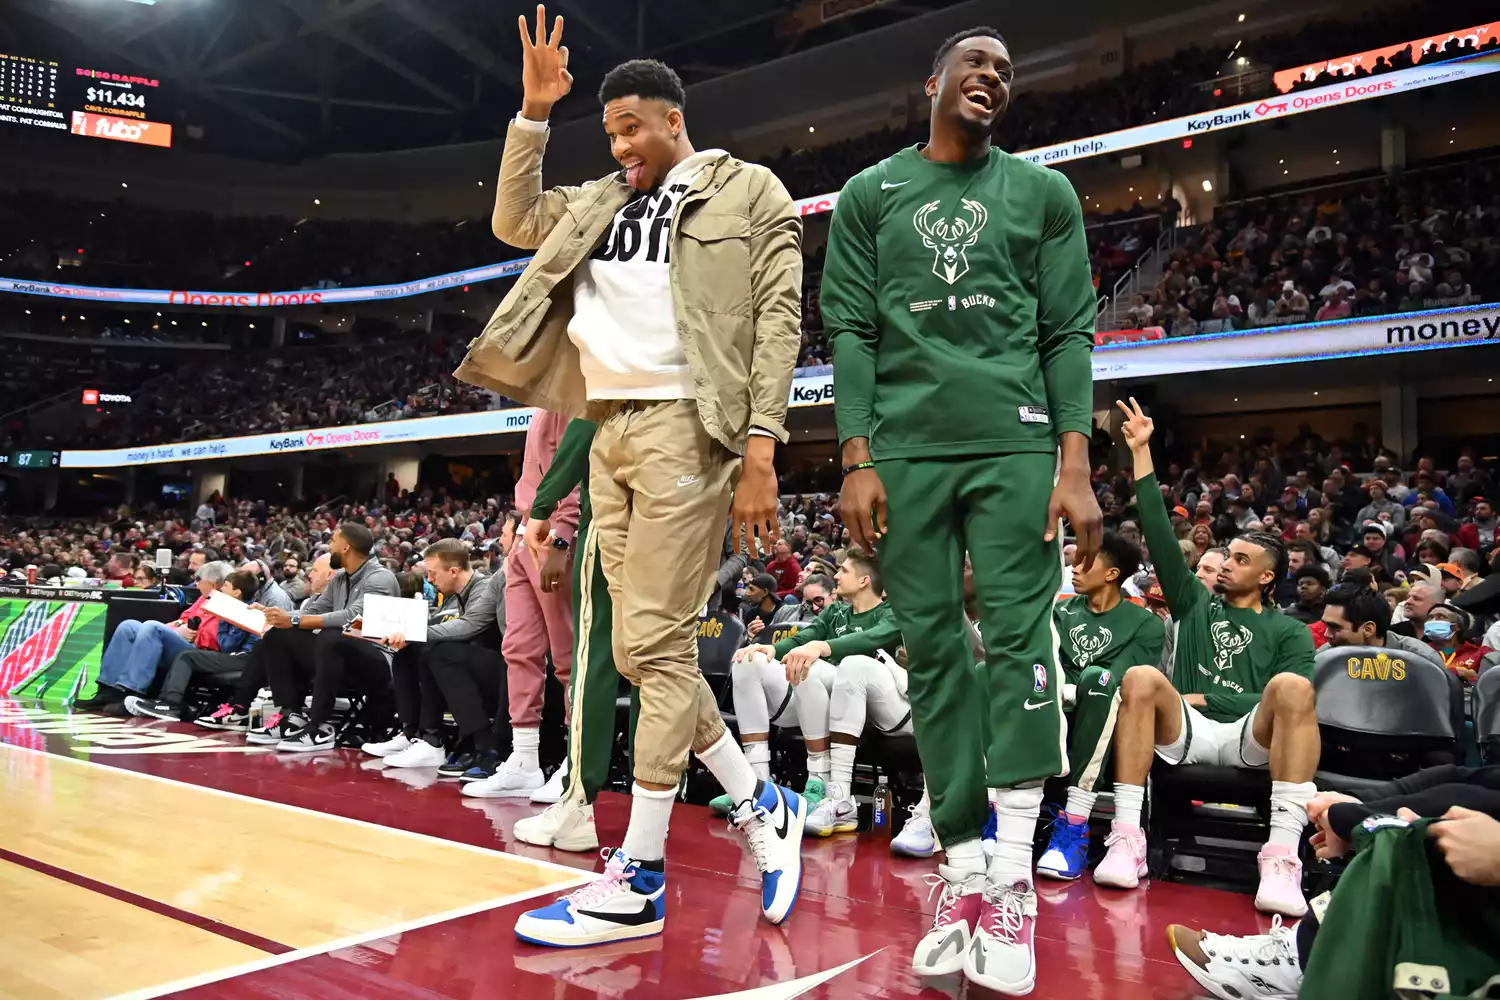 Giannis Antetokounmpo #34 and Thanasis Antetokounmpo #43 of the Milwaukee Bucks celebrate from the bench during the second half against the Cleveland Cavaliers at Rocket Mortgage Fieldhouse on January 21, 2023 in Cleveland, Ohio. The Cavaliers defeated the Bucks 114-102.